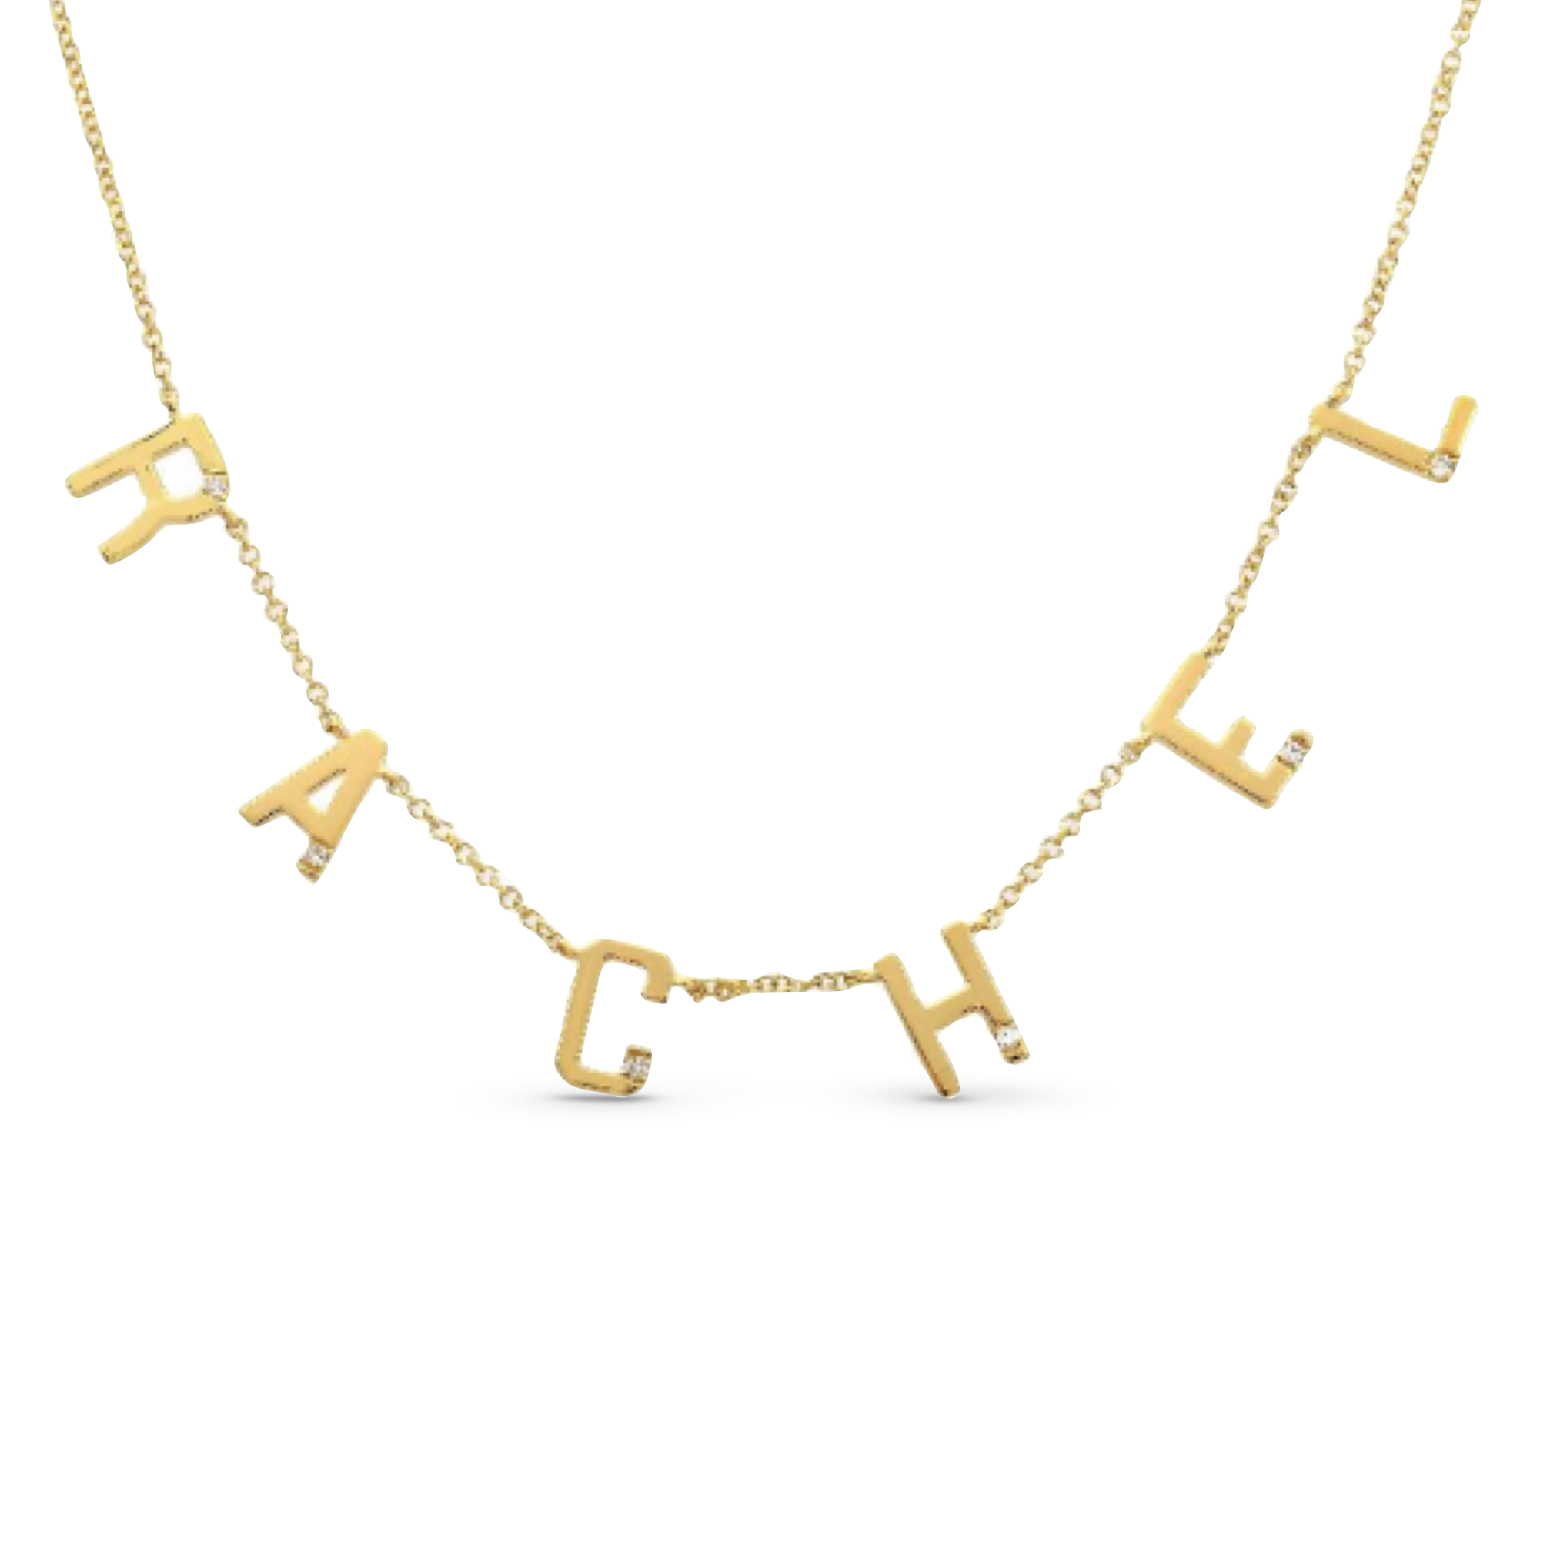 Custom Elongated Multiple Initials with Tiny Diamond Necklace